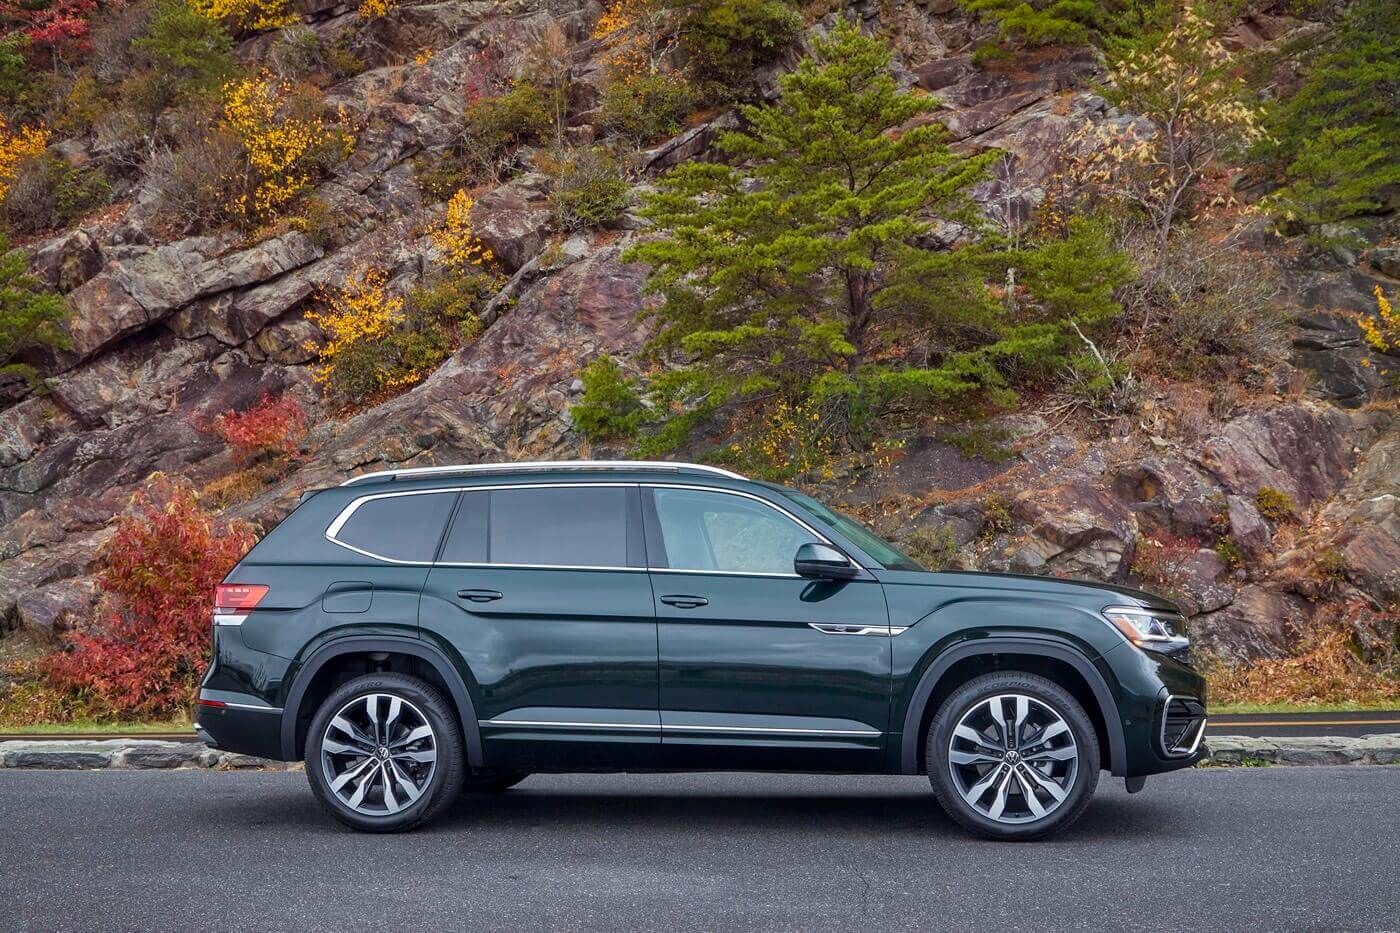 lateral view of the 2022 Volkswagen Atlas